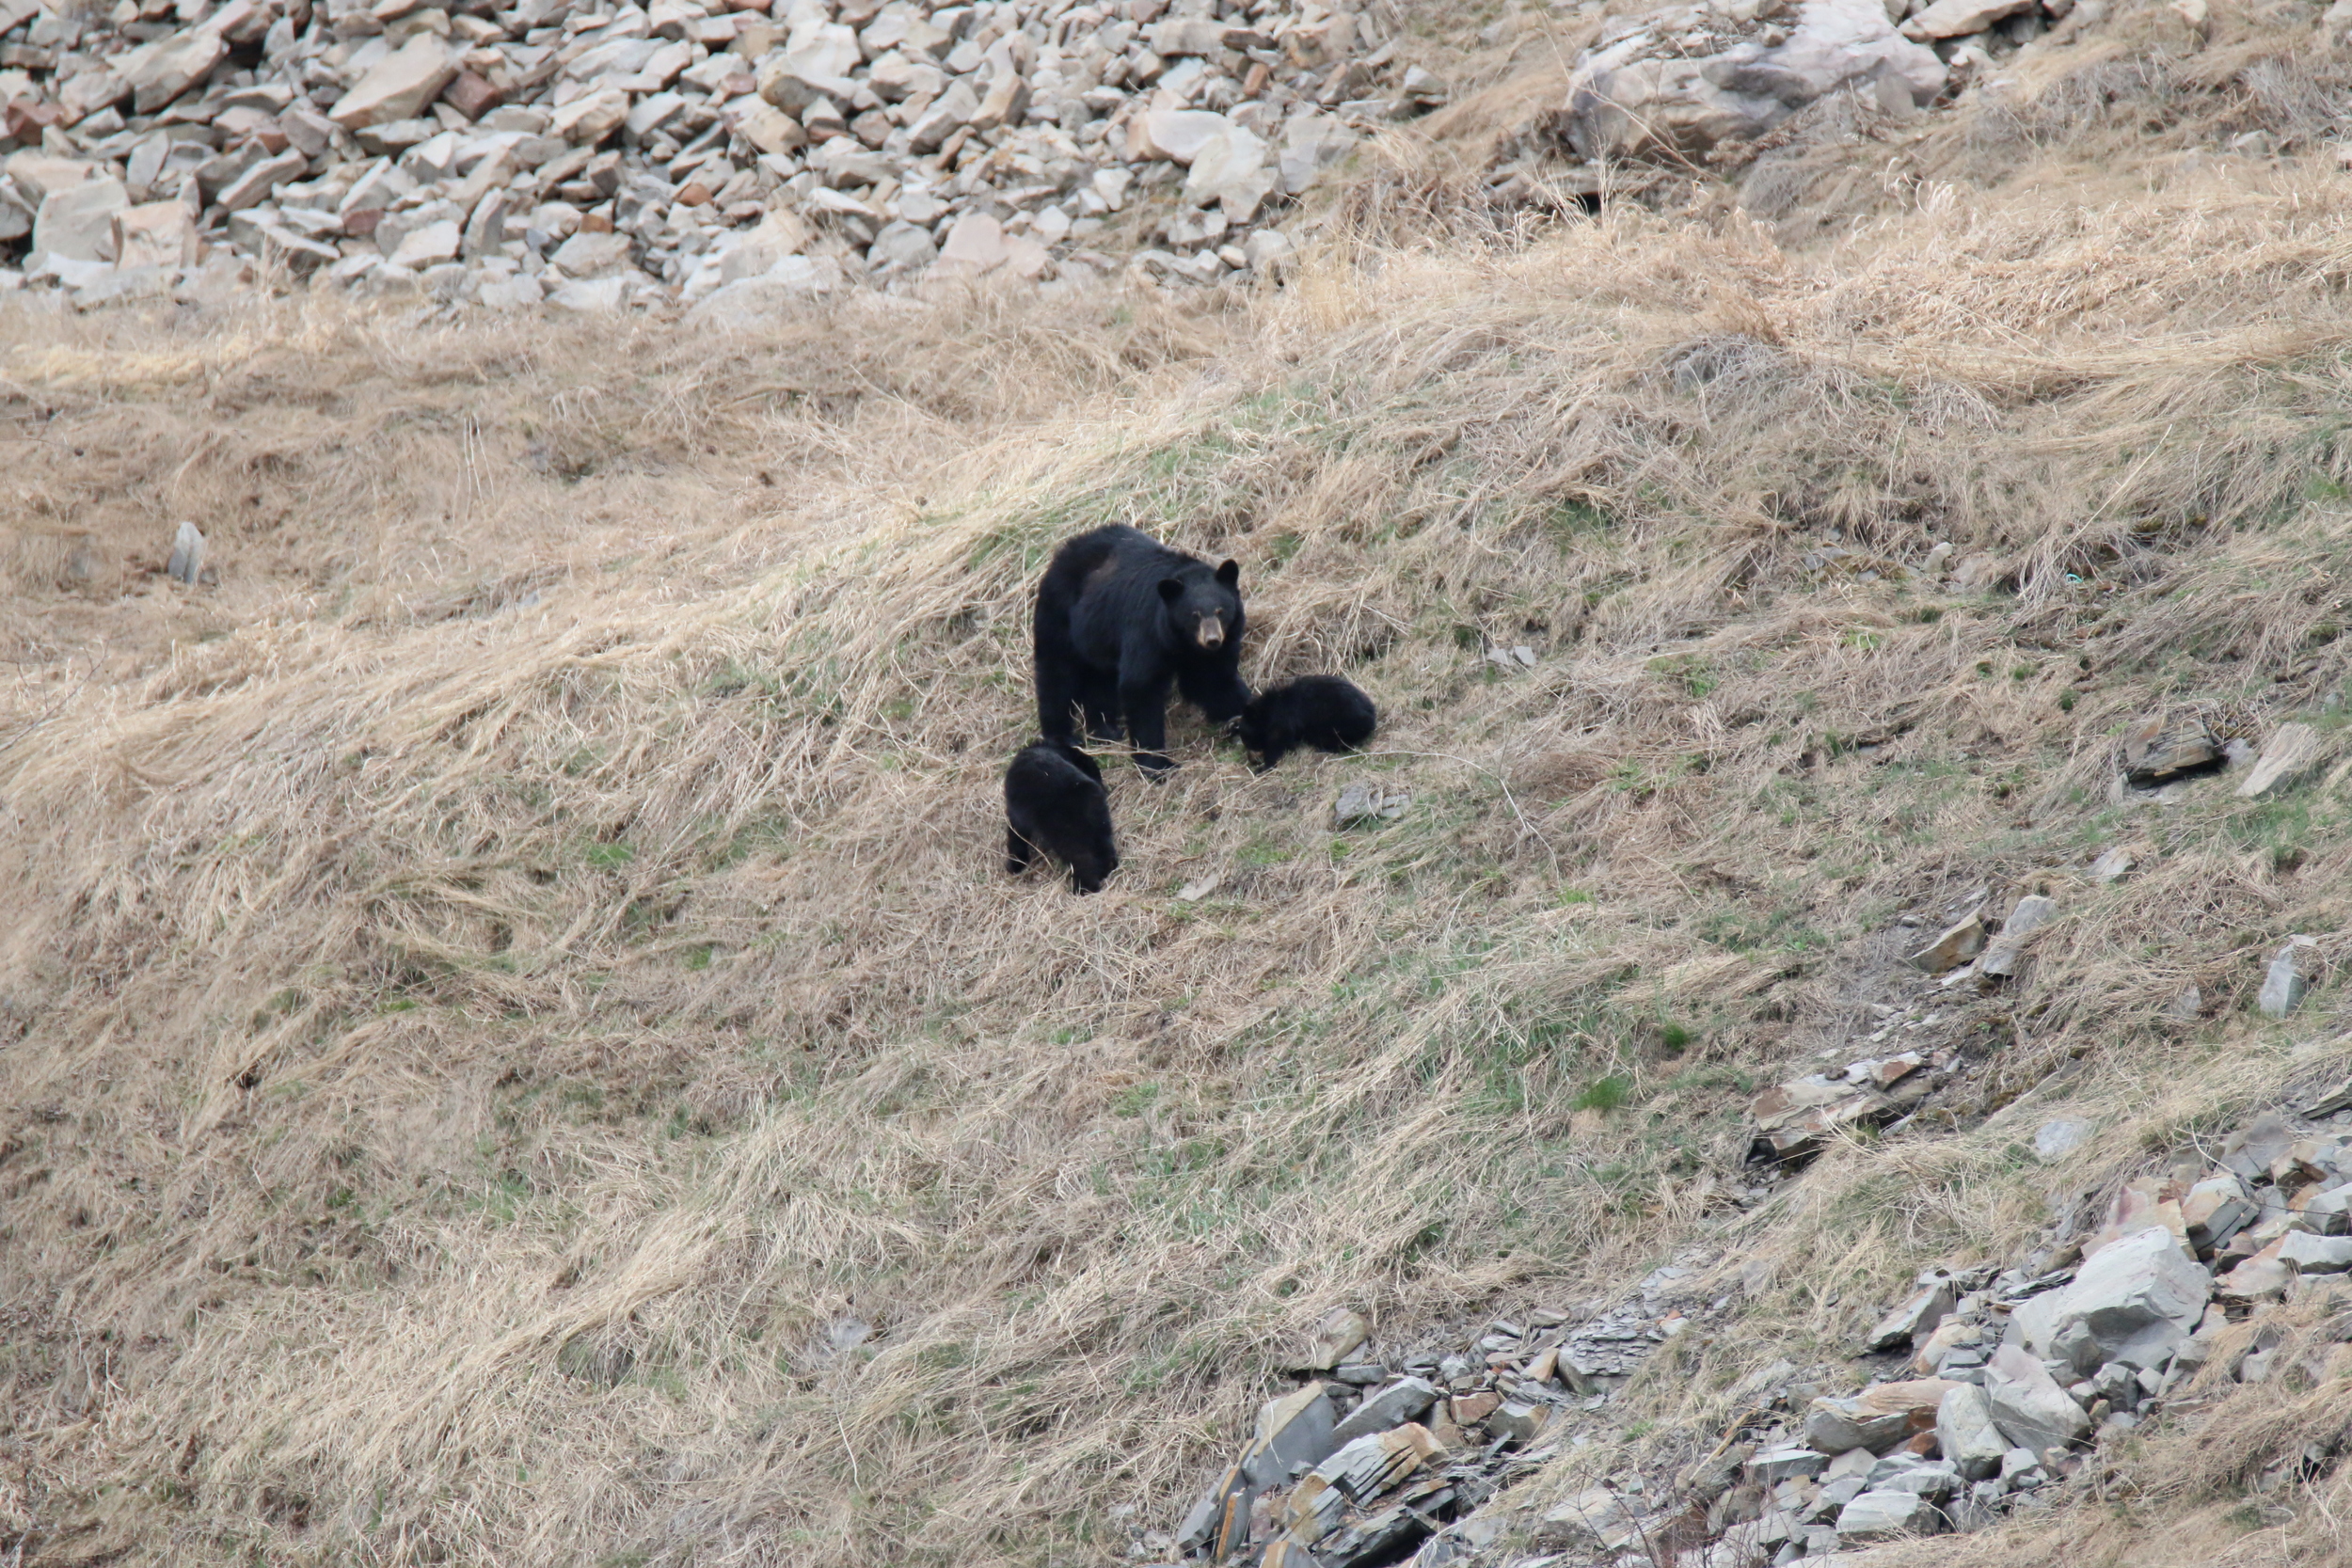 Black bears: just off the hwy